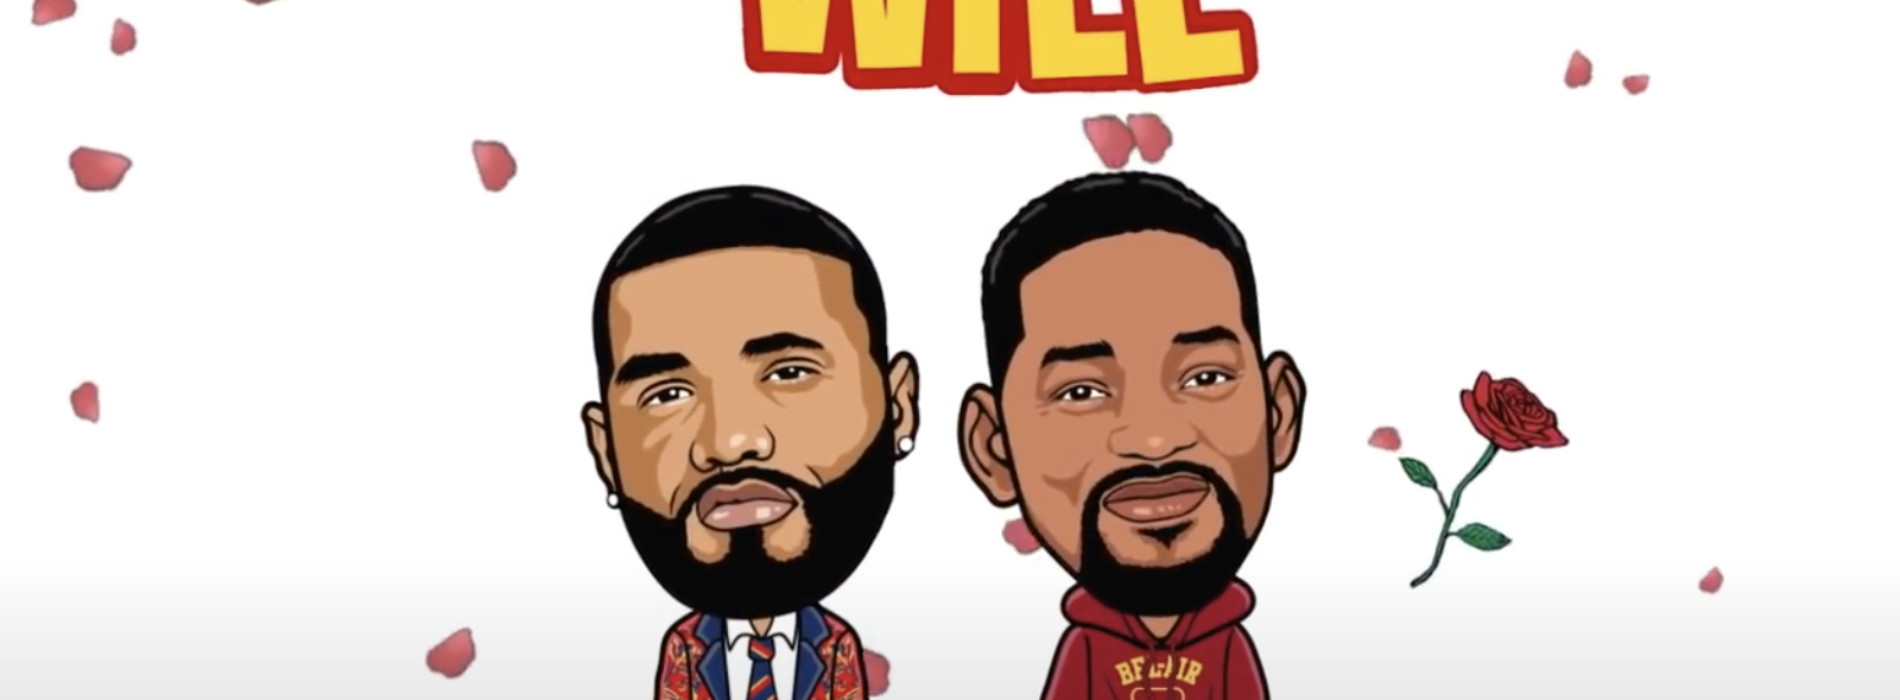 RAP US : Joyner Lucas & Will Smith – Will (Remix) / Future – Hard To Choose One / Lil Tjay – Zoo York (feat. Fivio Foreign & Pop Smoke) / Polo G – Be Something ft. Lil Baby (Official Music Video) – Mai 2020